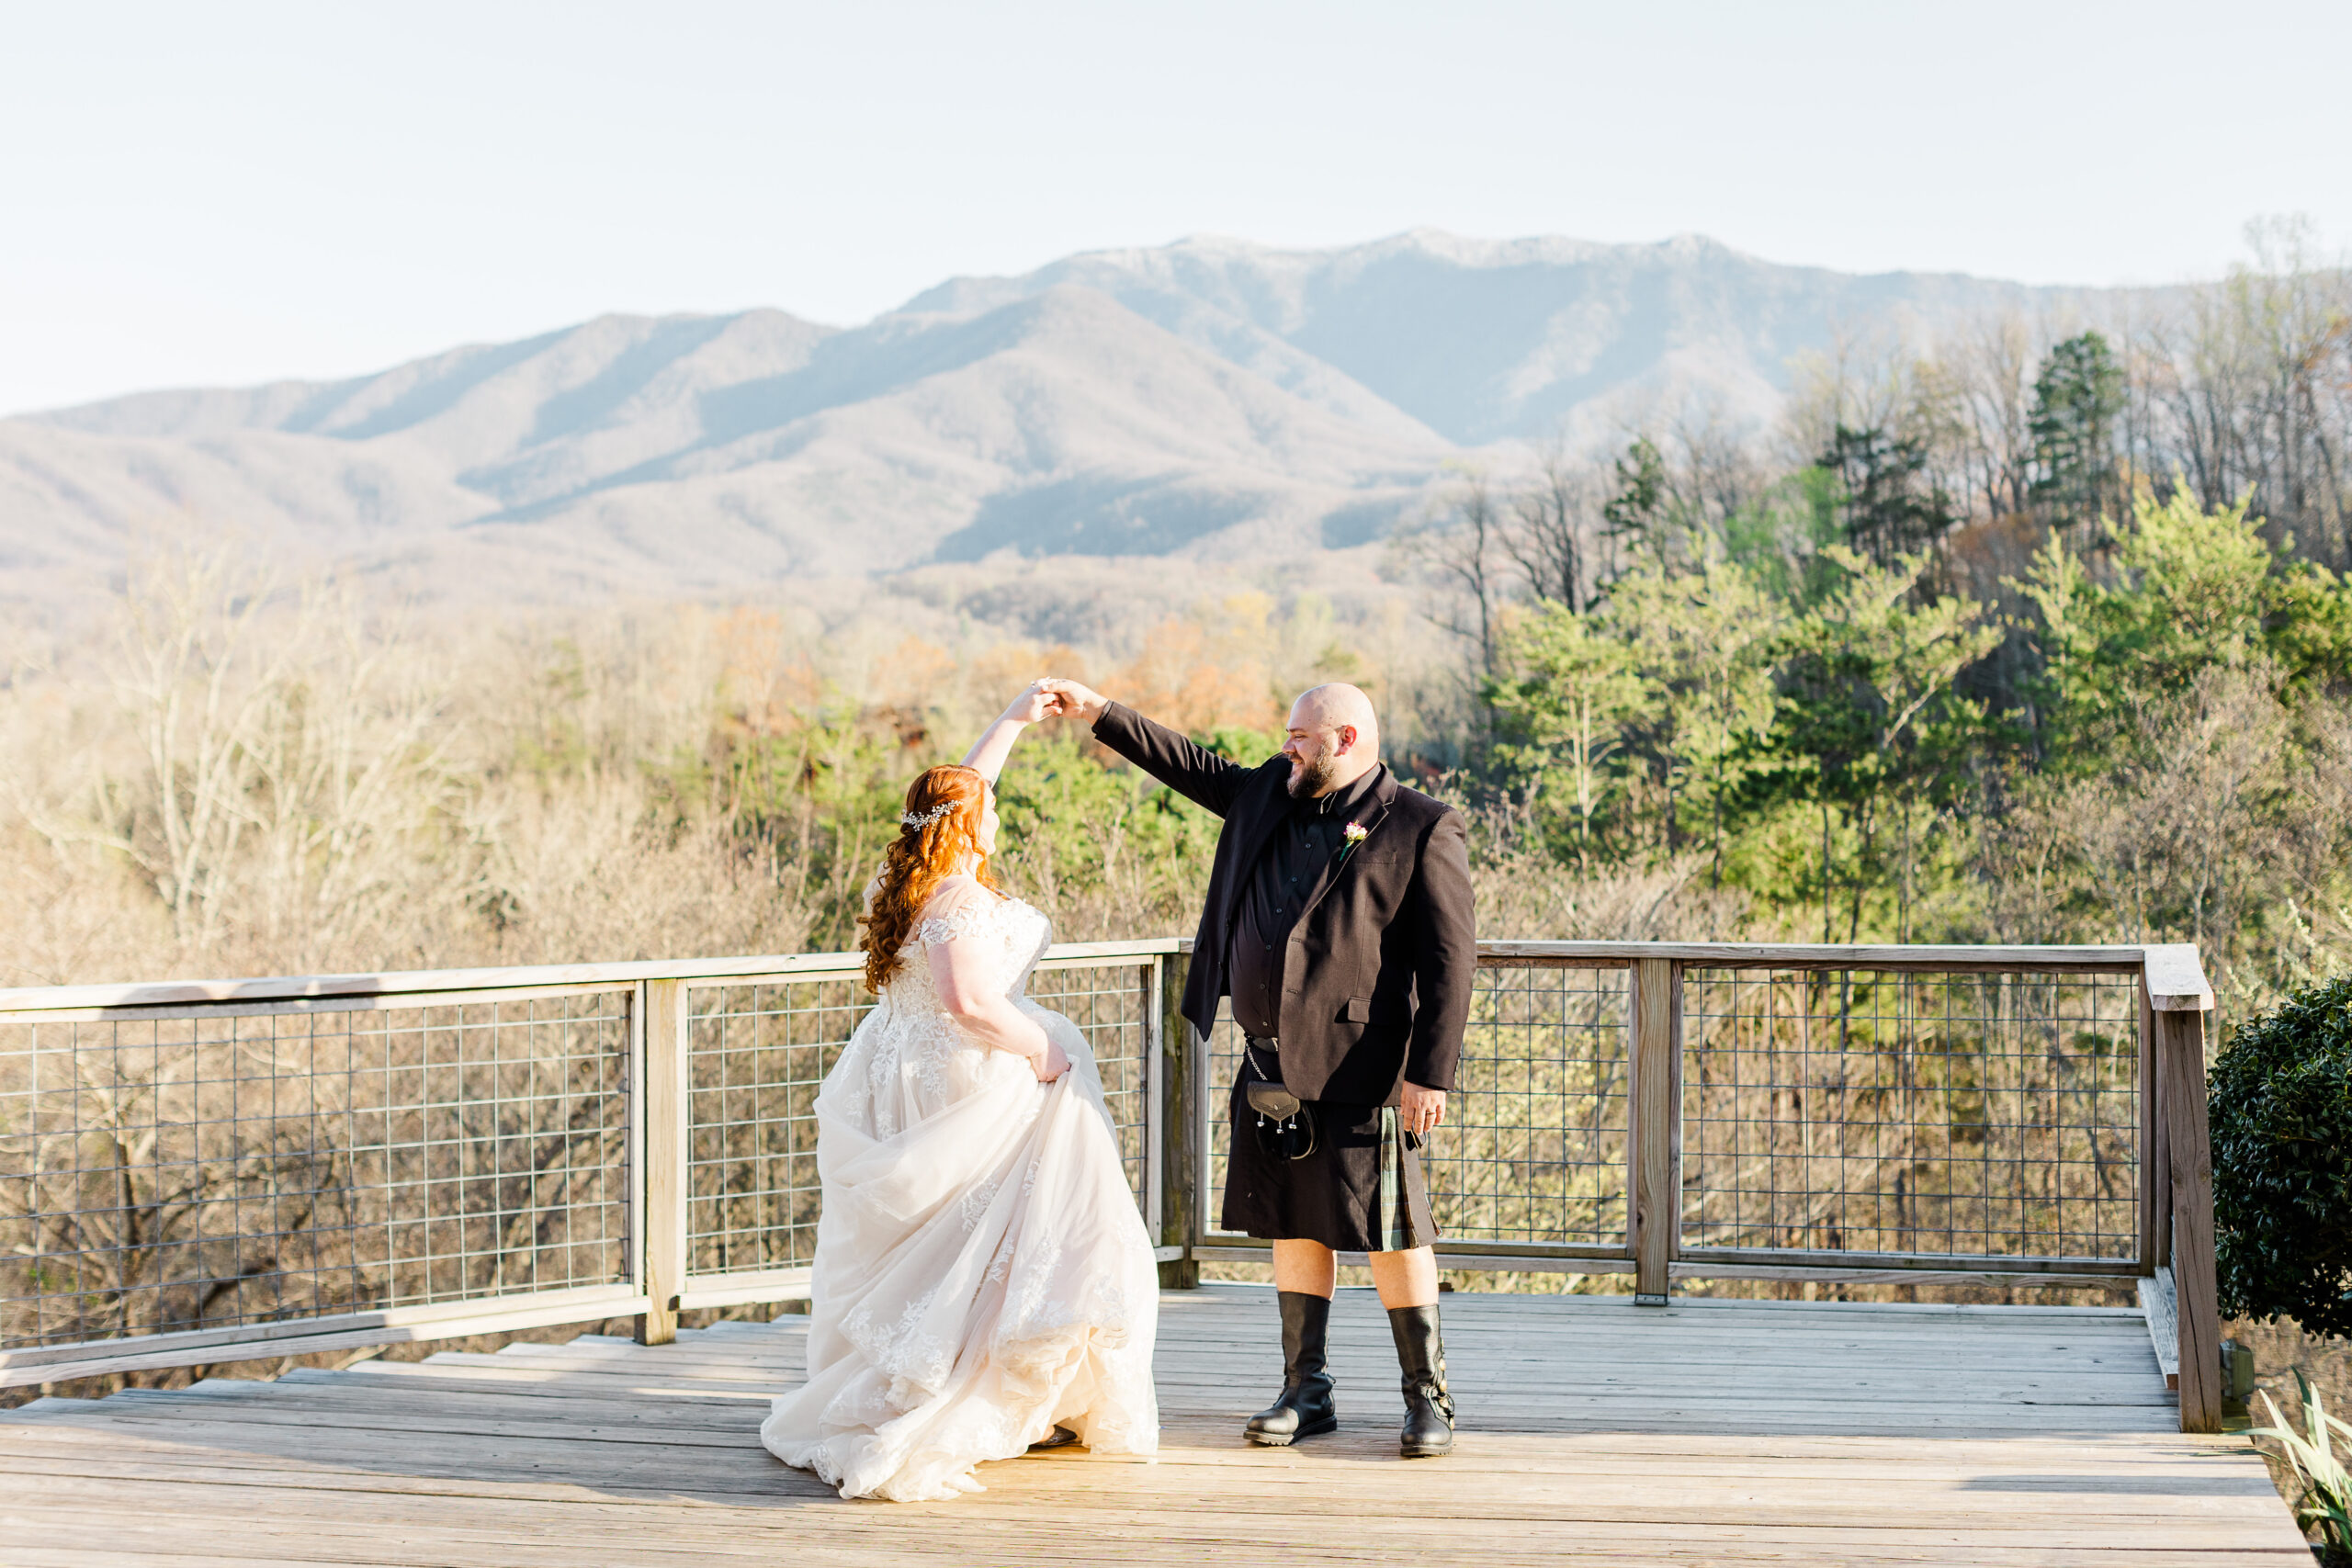 Fairytale Wedding in the Smoky Mountains